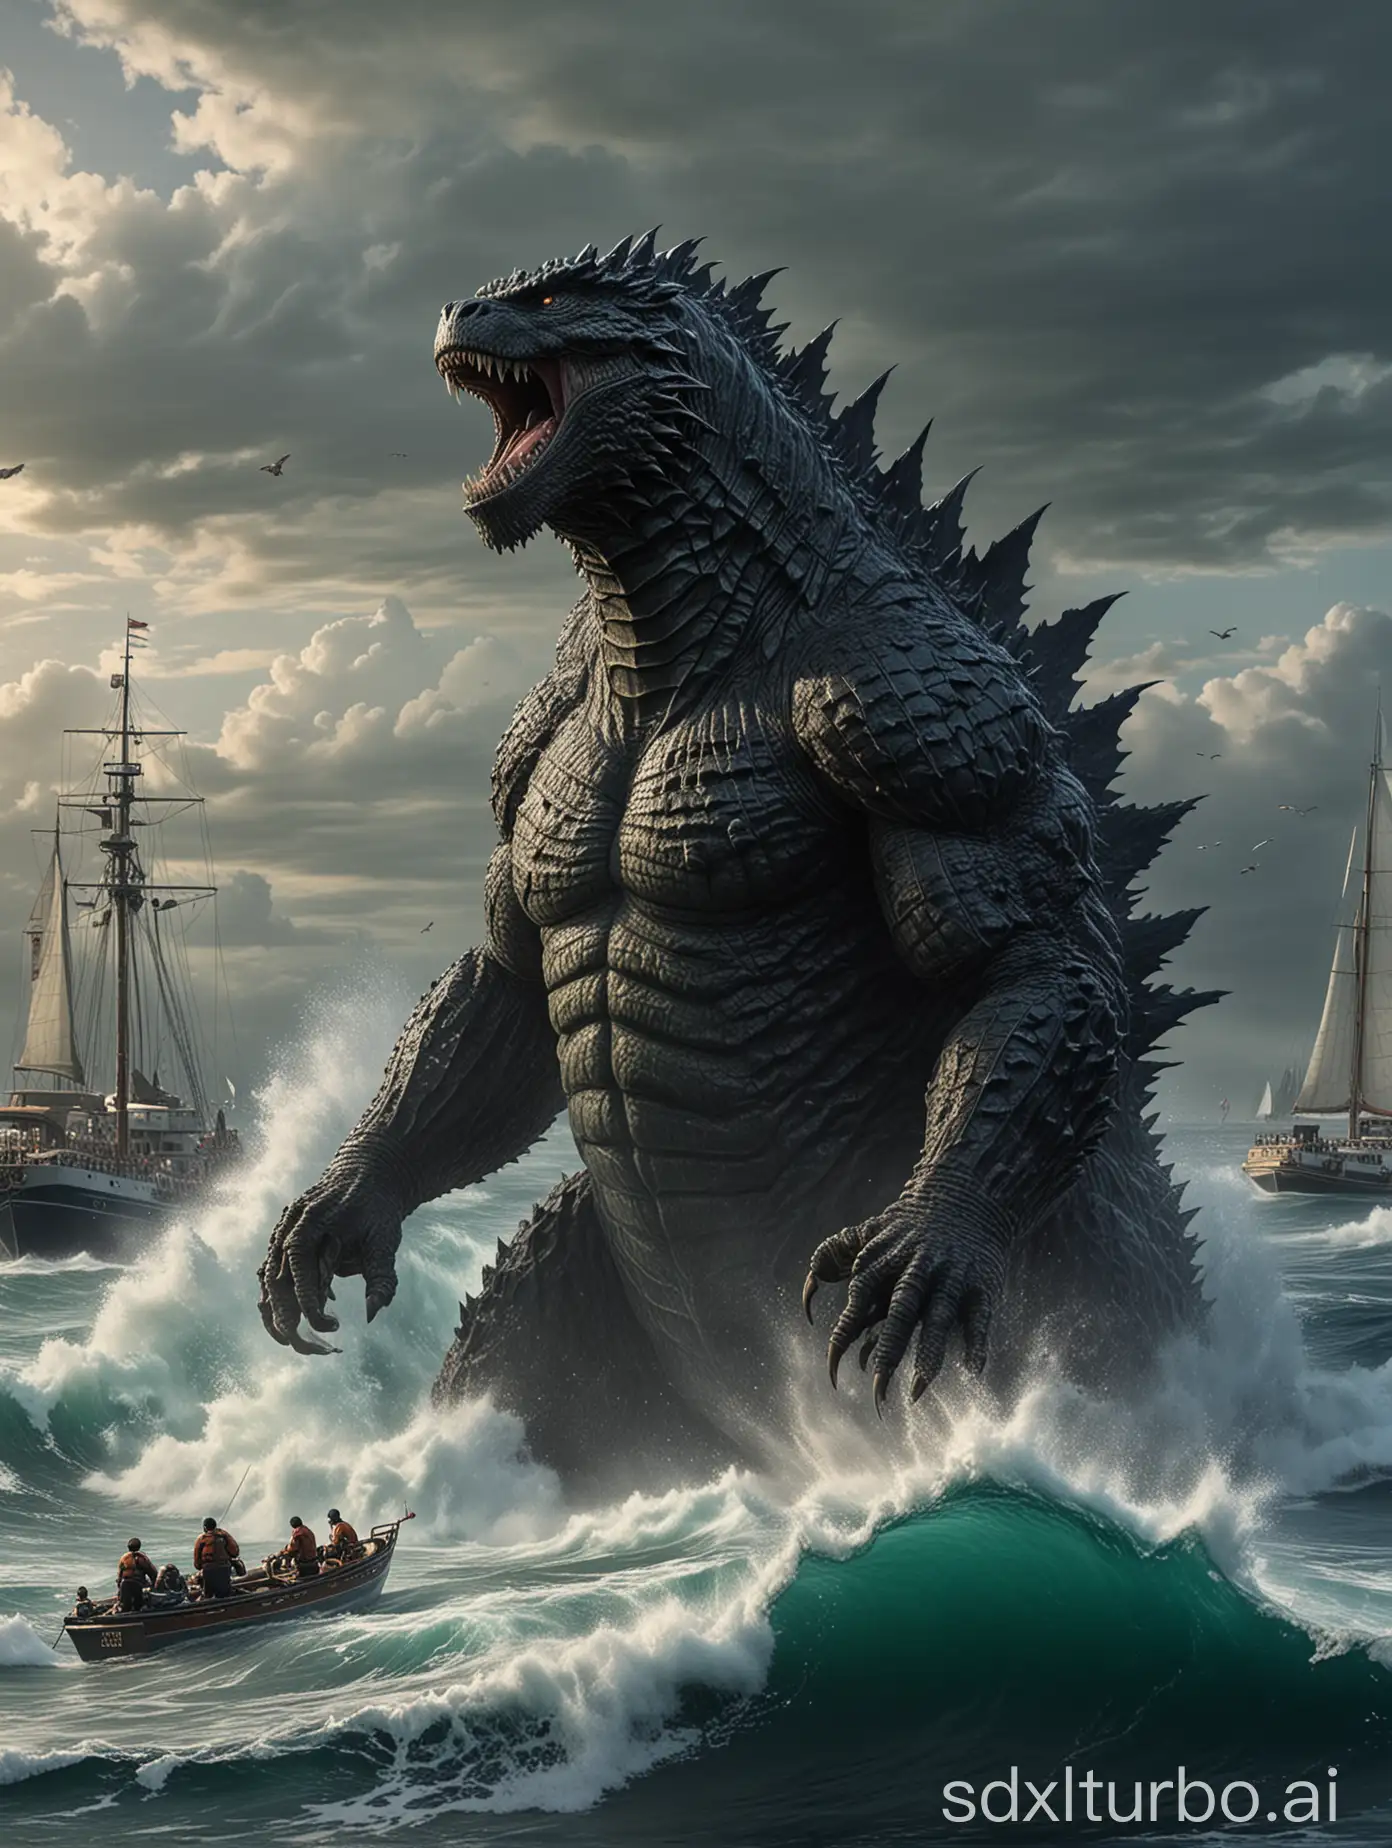 Gigantic, majestic, magnificent, towering, Godzilla, in the sea, surrounded by yachts, small boats, amidst the raging waves, in high definition, 4K, rich in detail